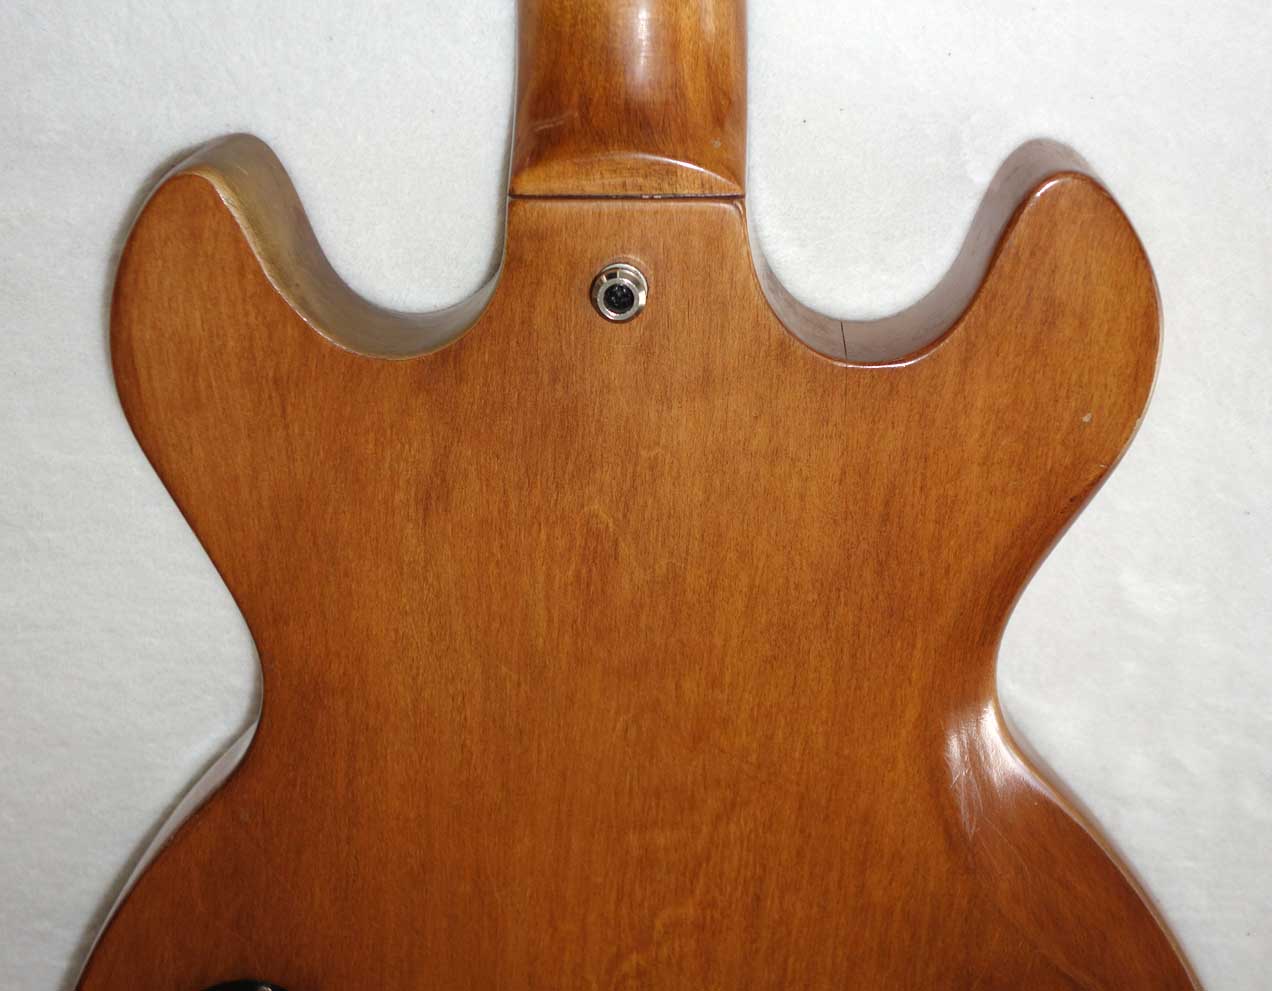 Vintage 1980 Gibson Firebrand 335-S Standard  Solid Body Guitar in Natural, All Original